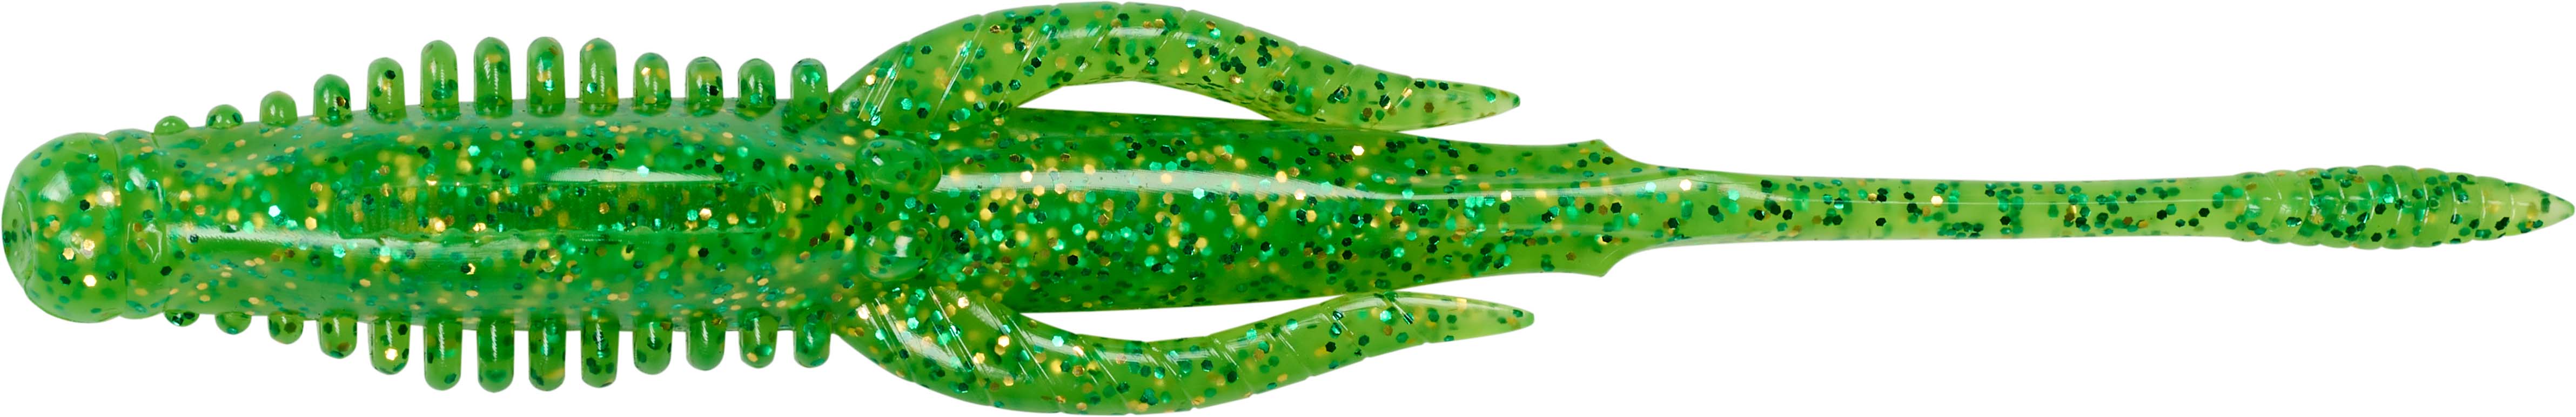 Color:Chartreuse Gold Green Flake:Nories 4.5 Inch Hulabug Bladed Jig Trailer - 5 Pack